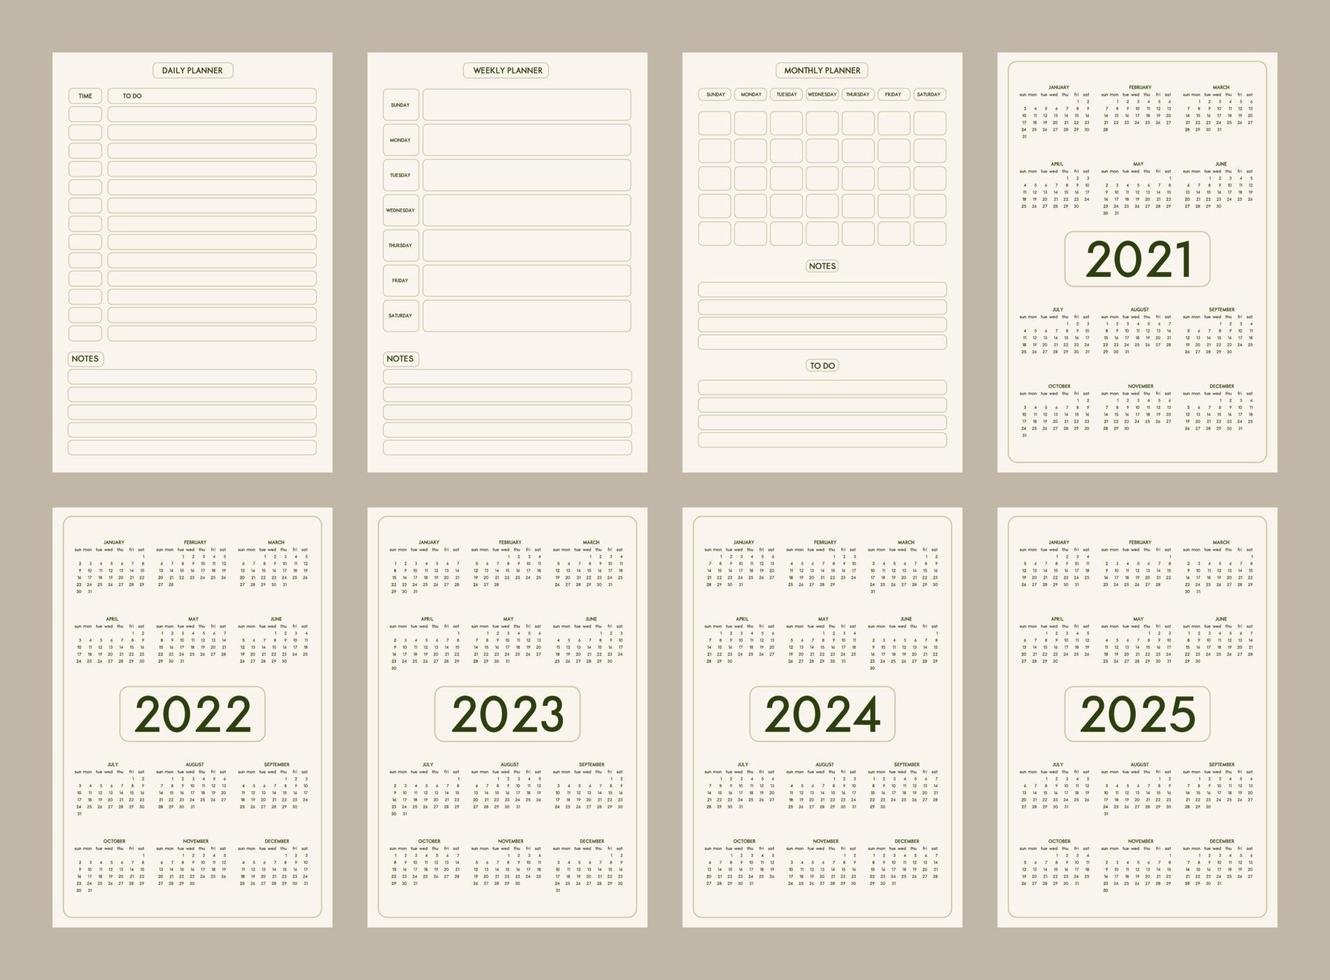 2022 2023 2024 2025 calendar daily weekly monthly personal planner diary template minimalist trendy style, pastel beige olive natural color palette. Week starts on sunday vector